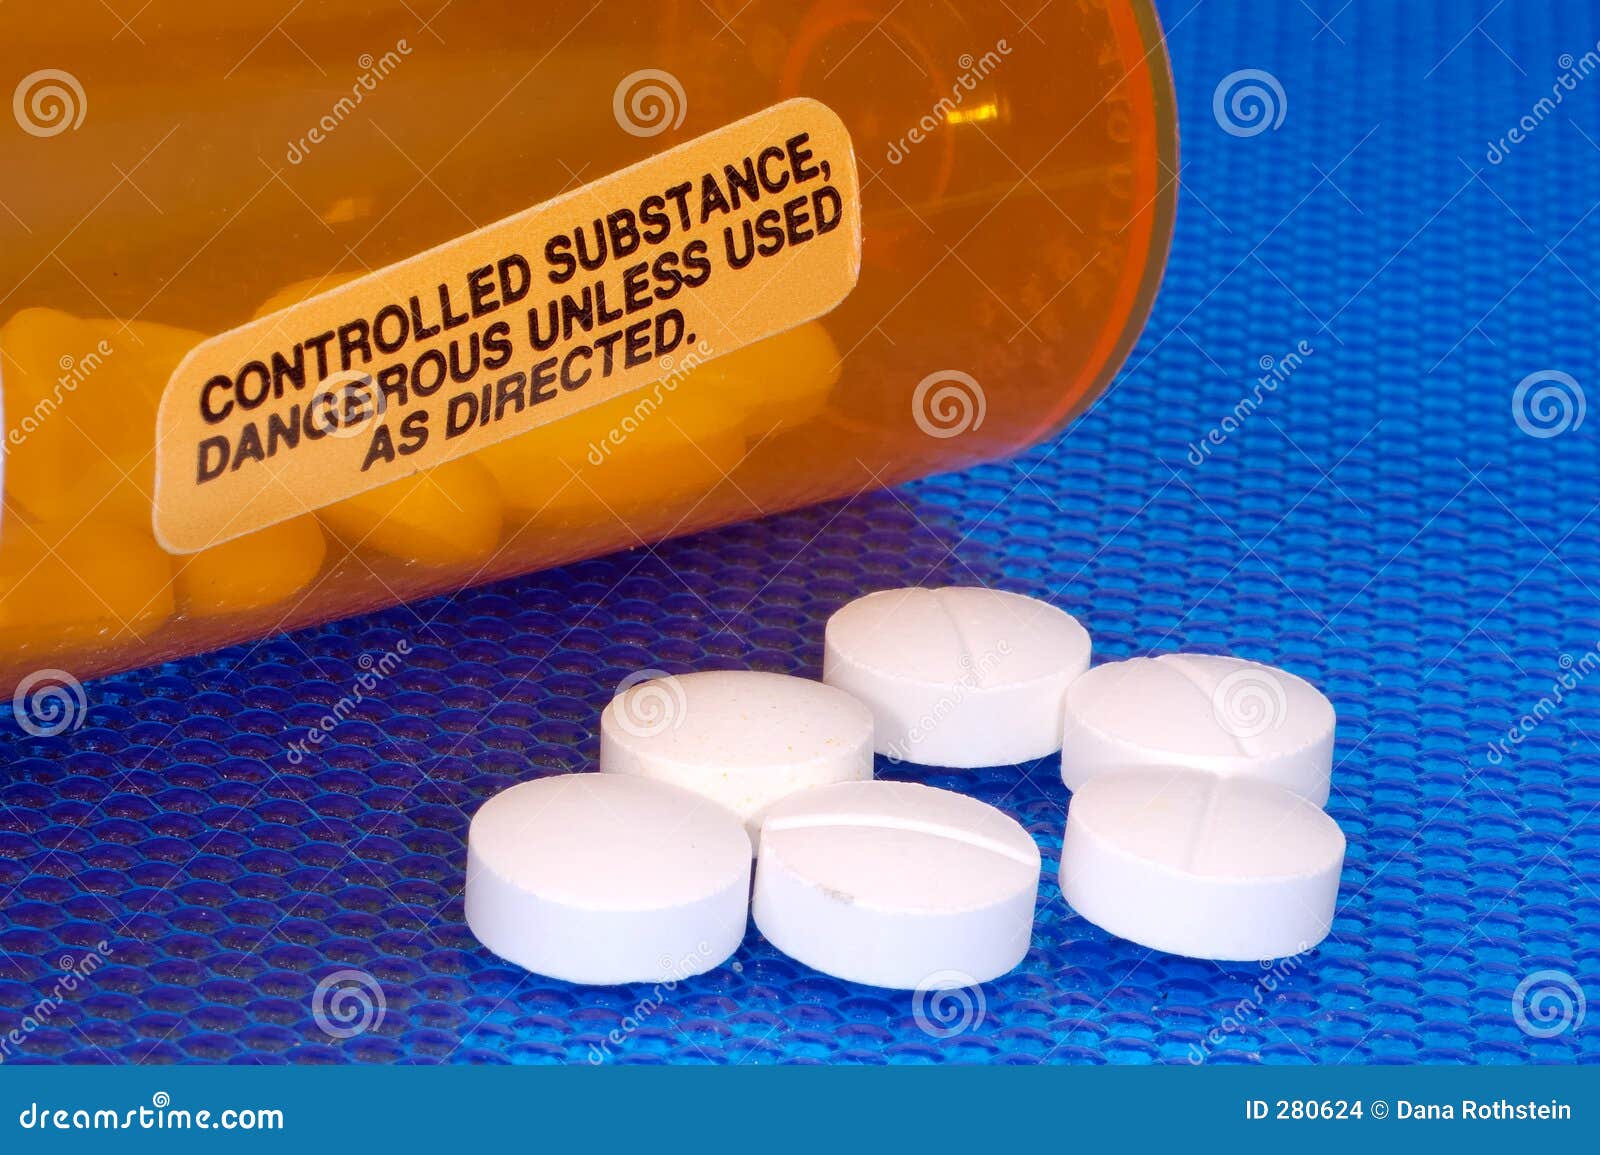 are all drugs controlled substances